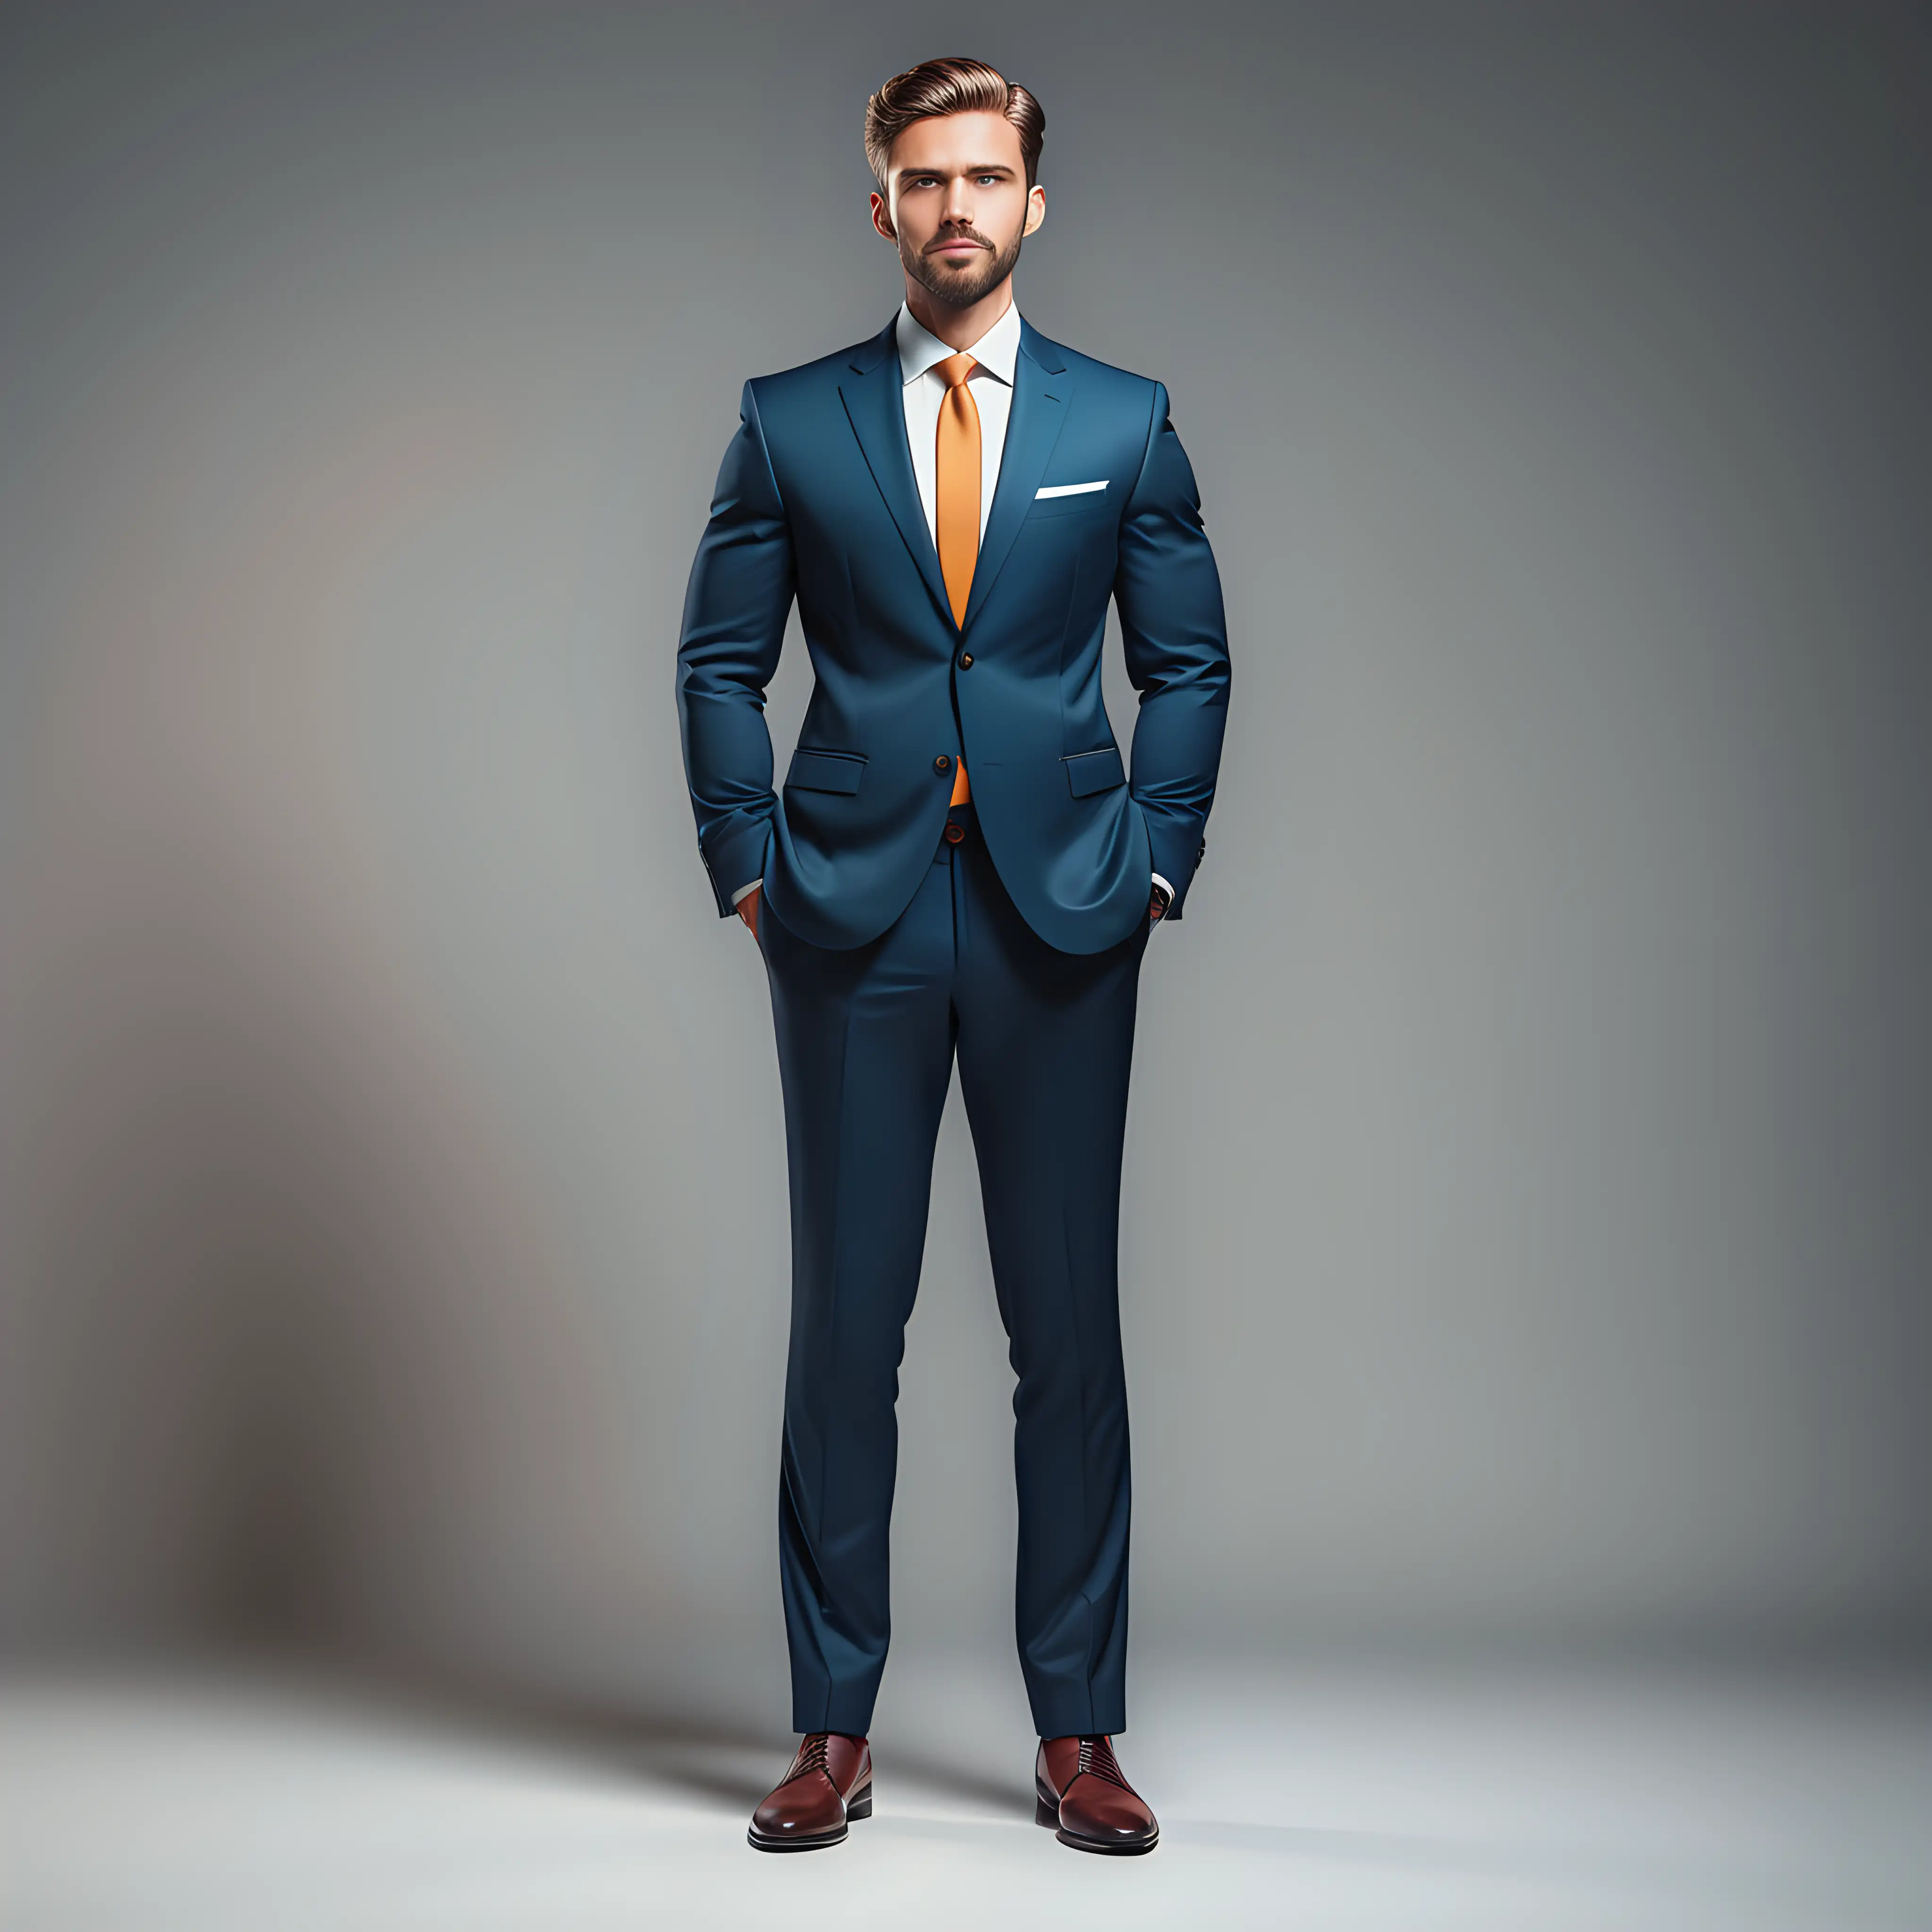 two colors, full body length, coloring book style, man in suit, front shot,  hands folded